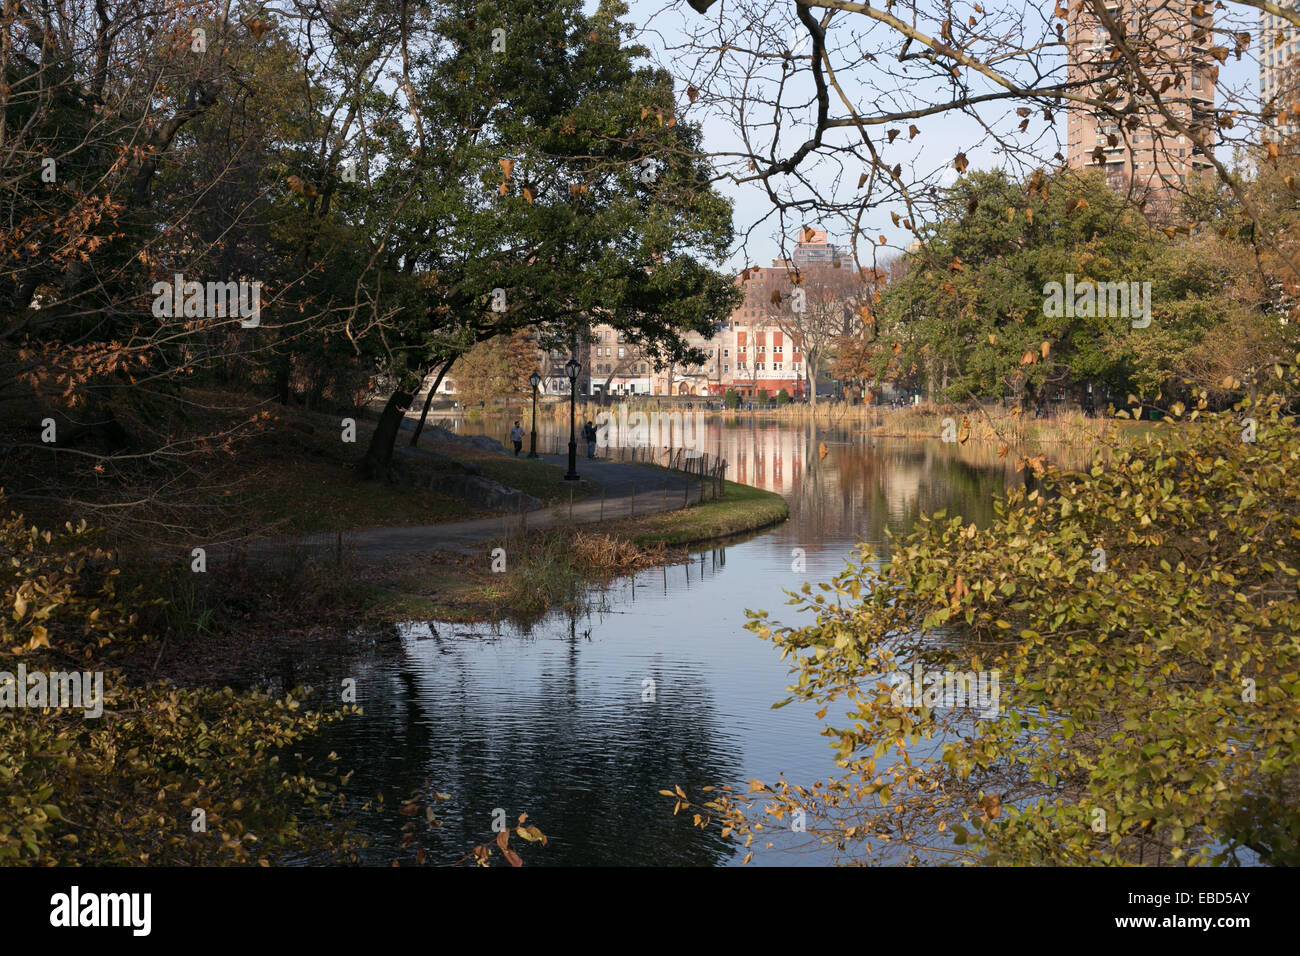 Landscape of the Harlem Meer in Central Park, New York City. Stock Photo